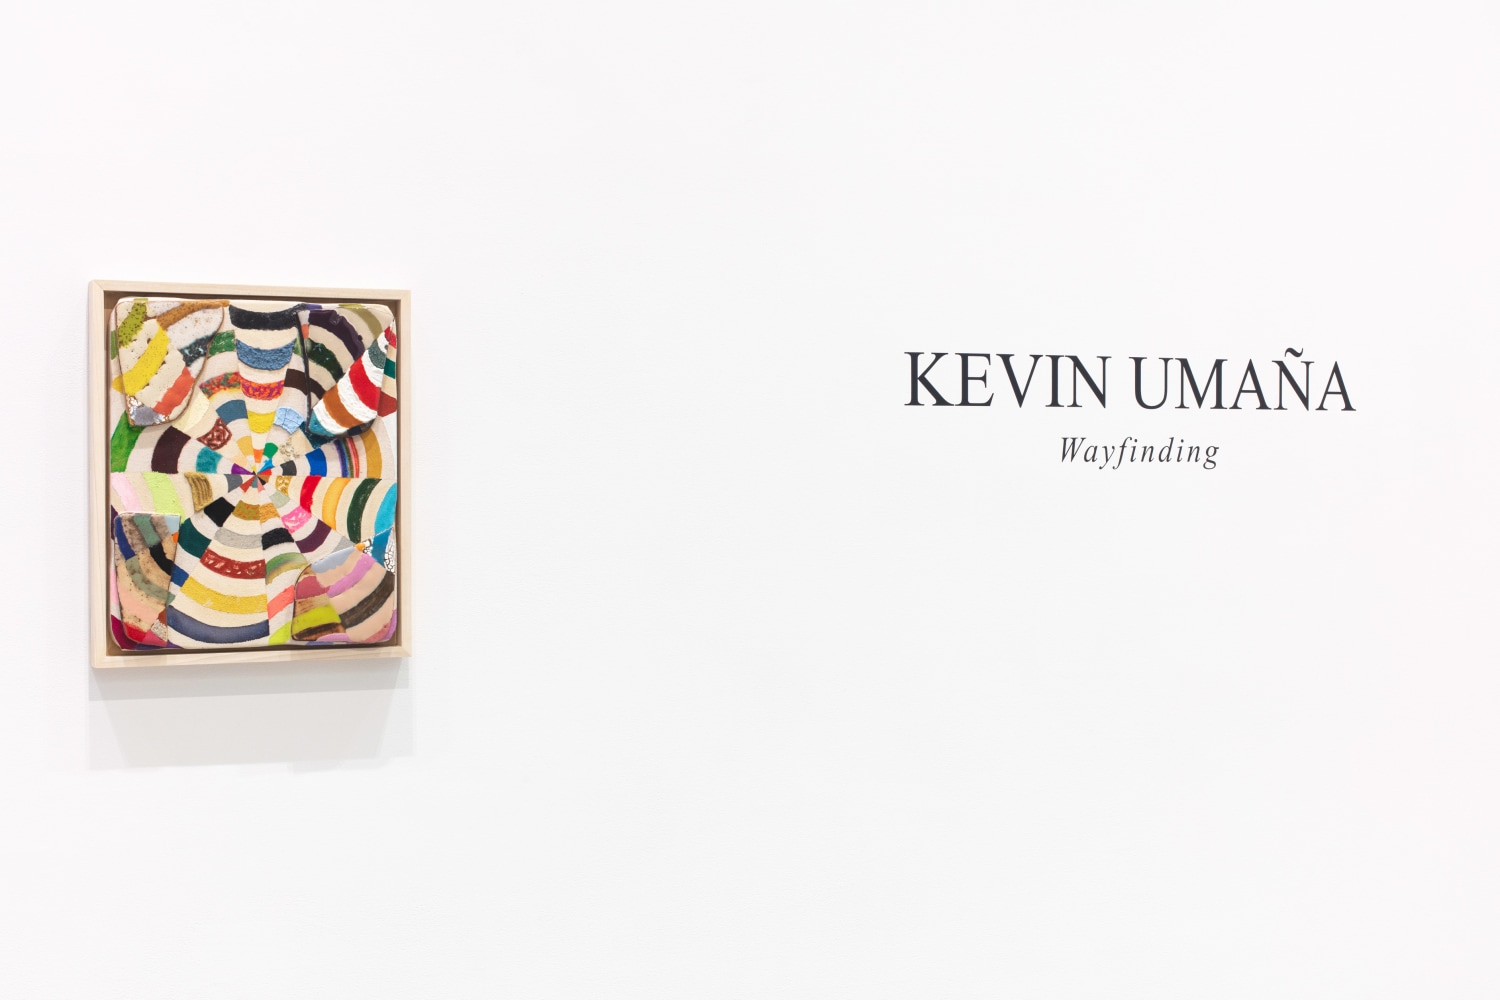 installation view of a colorful Umaña hybrid painting alongside the exhibition title wall text